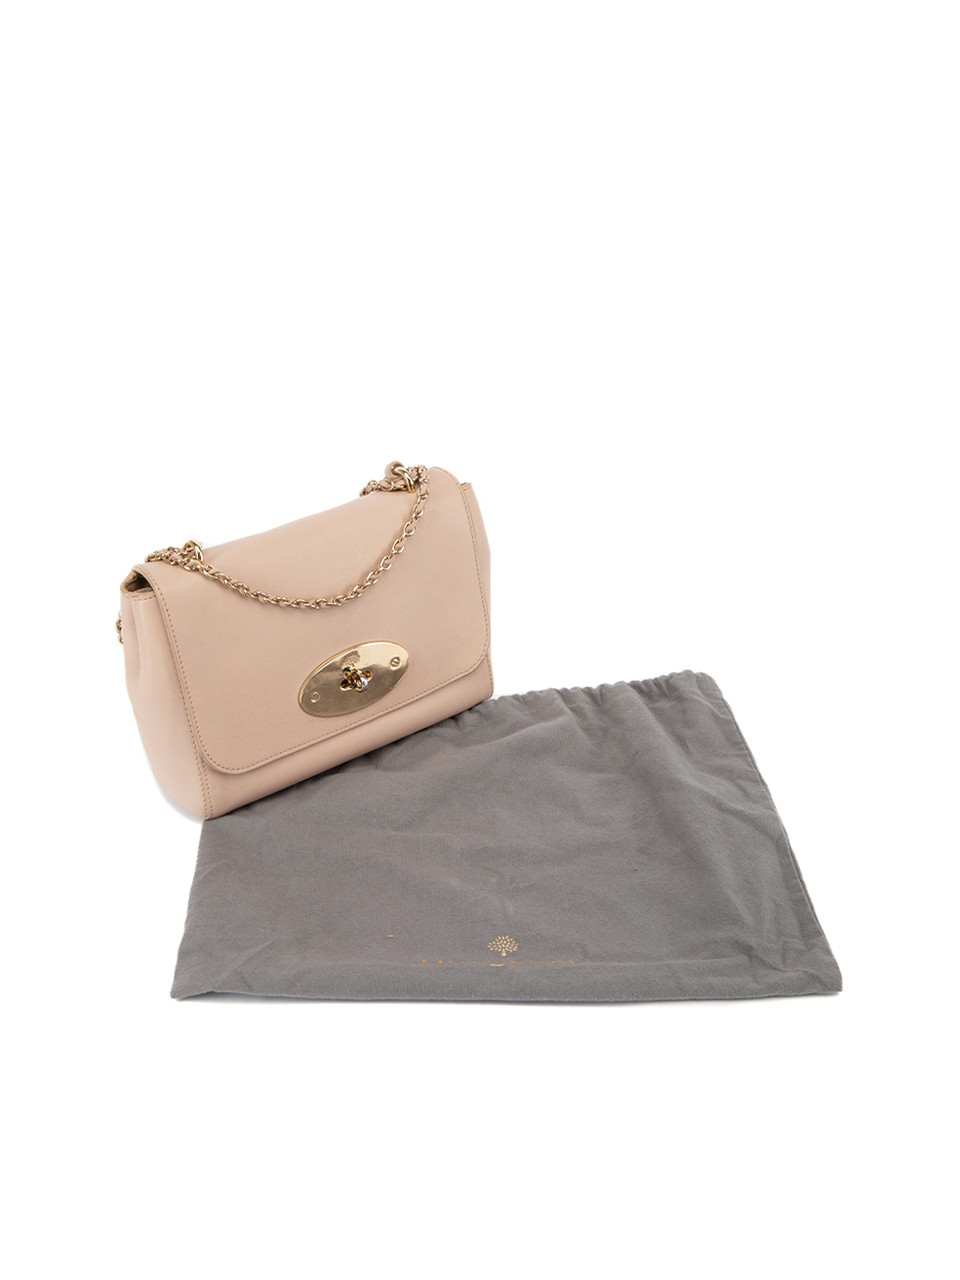 Mulberry Pink Leather Lily Flap Shoulder Bag